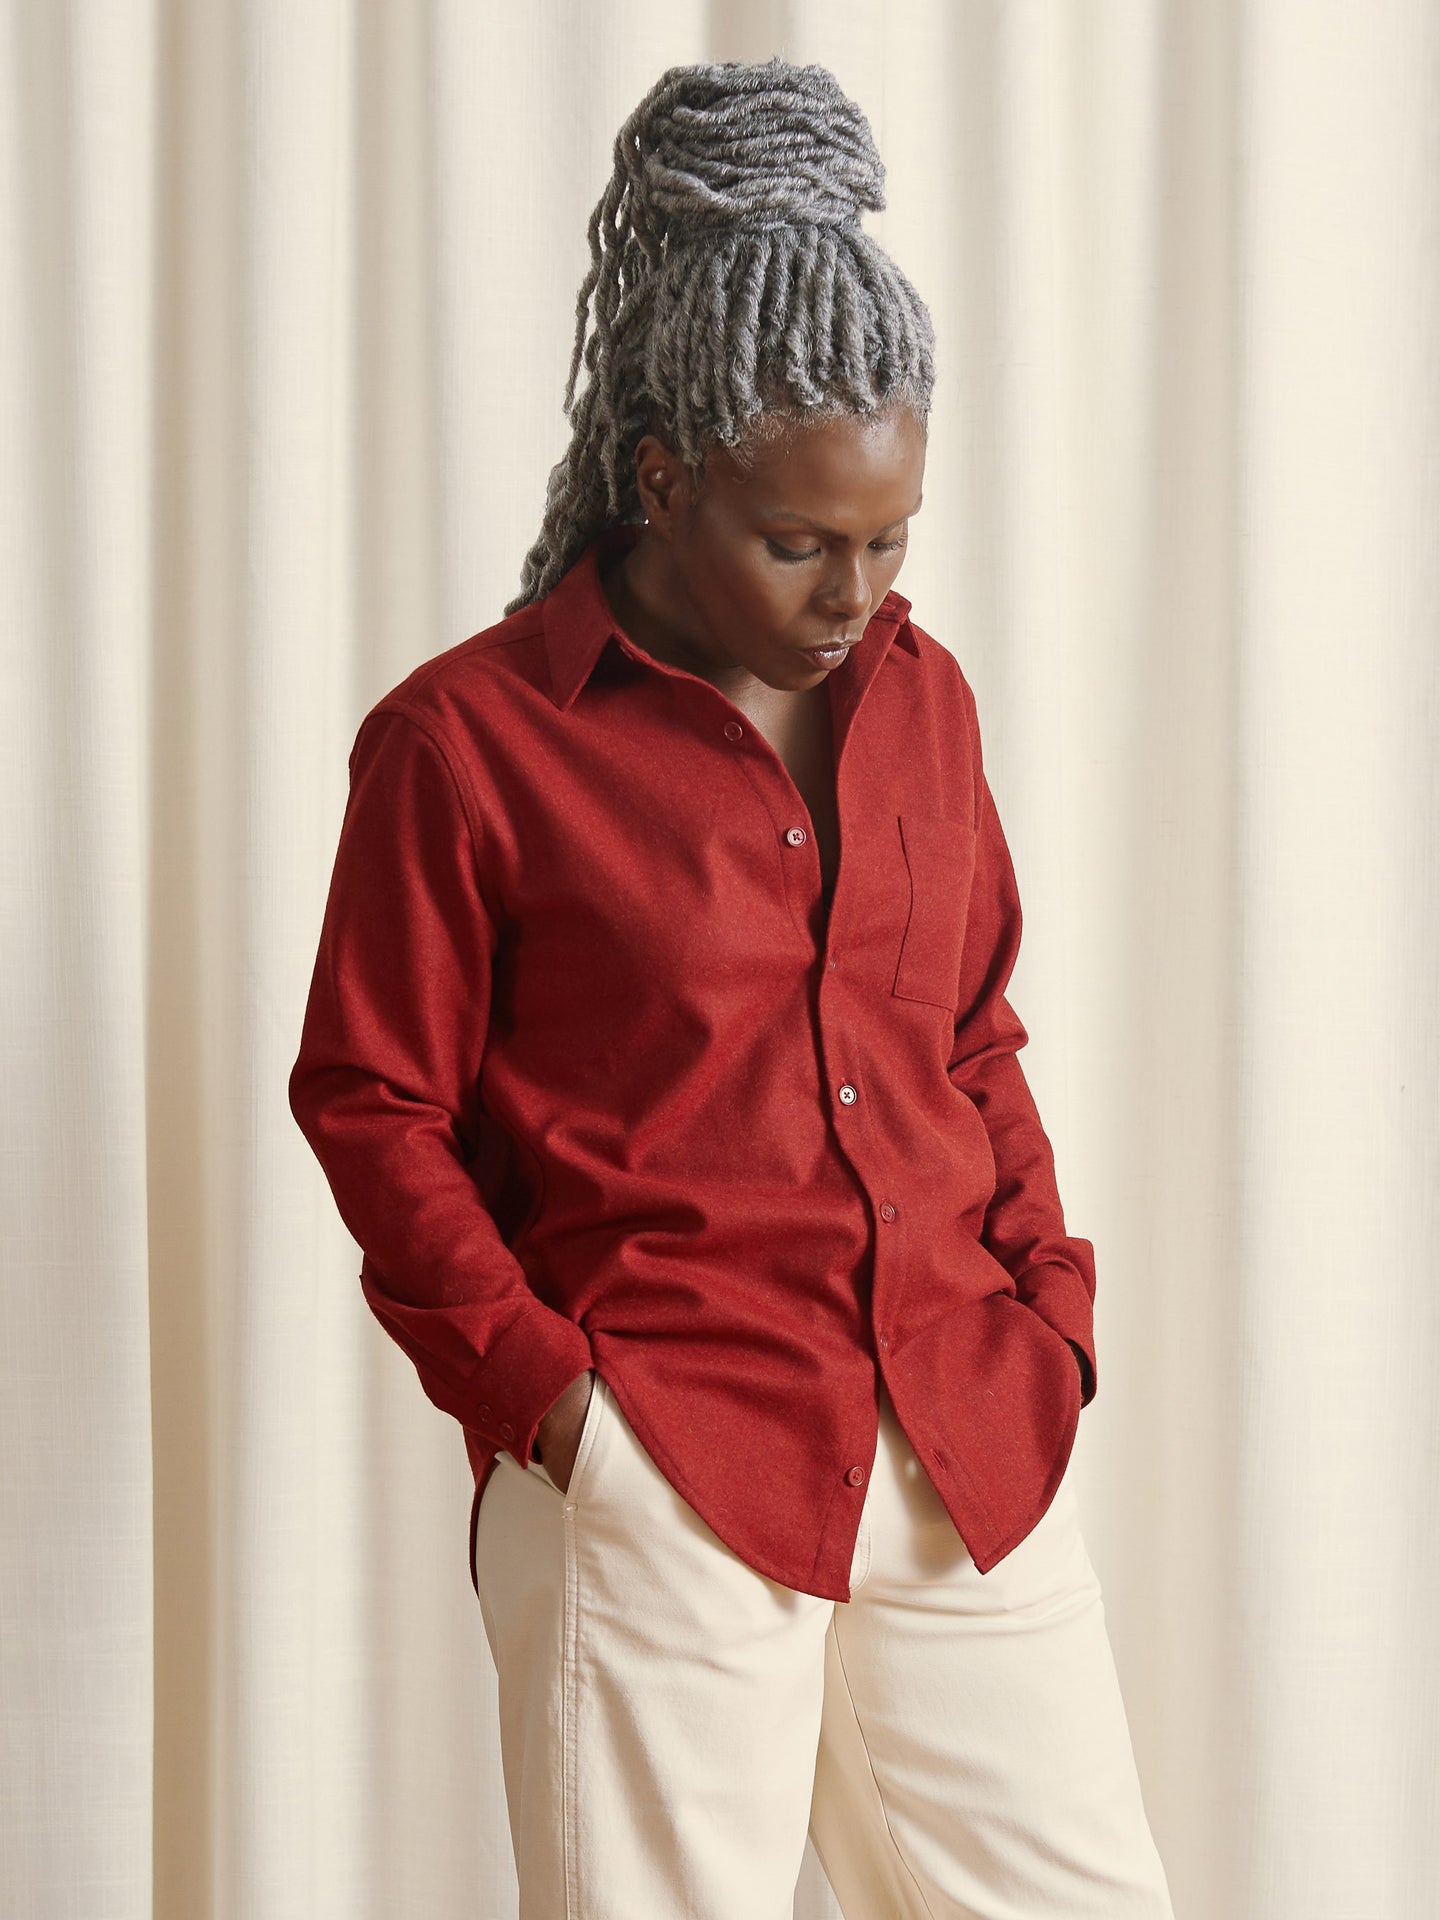 The New Oxford Shirt in Period Red Merino Wool | NAOMI NOMI